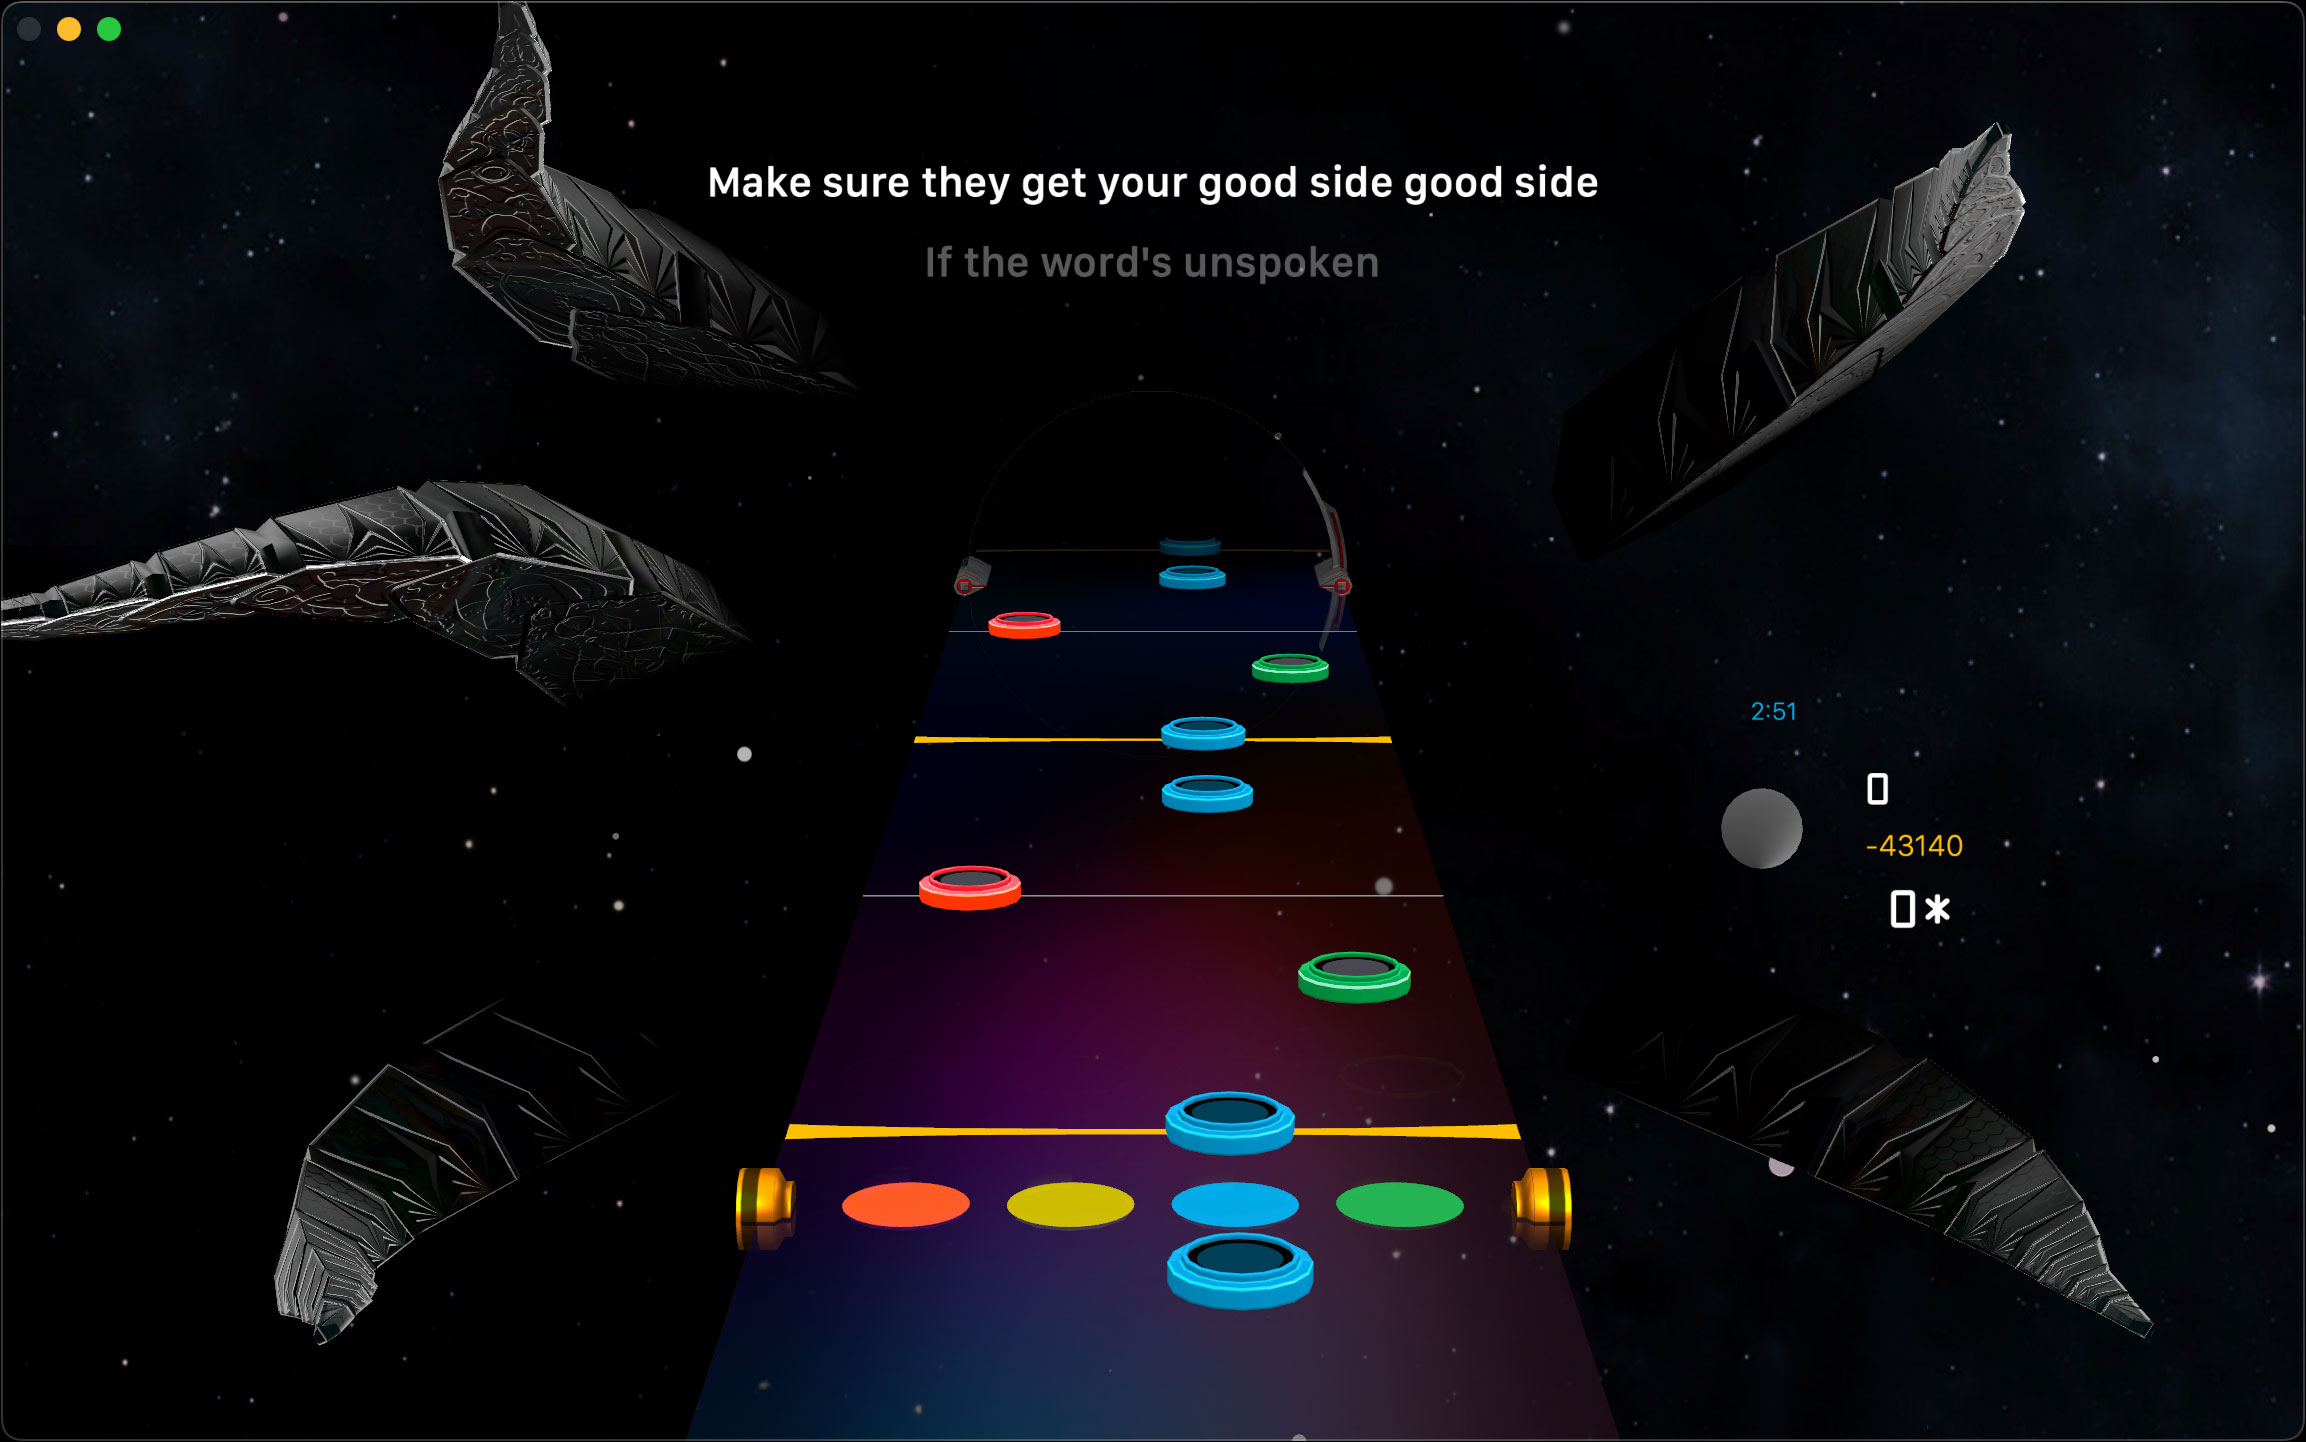 noice game screenshot of drum track played with midi input controller